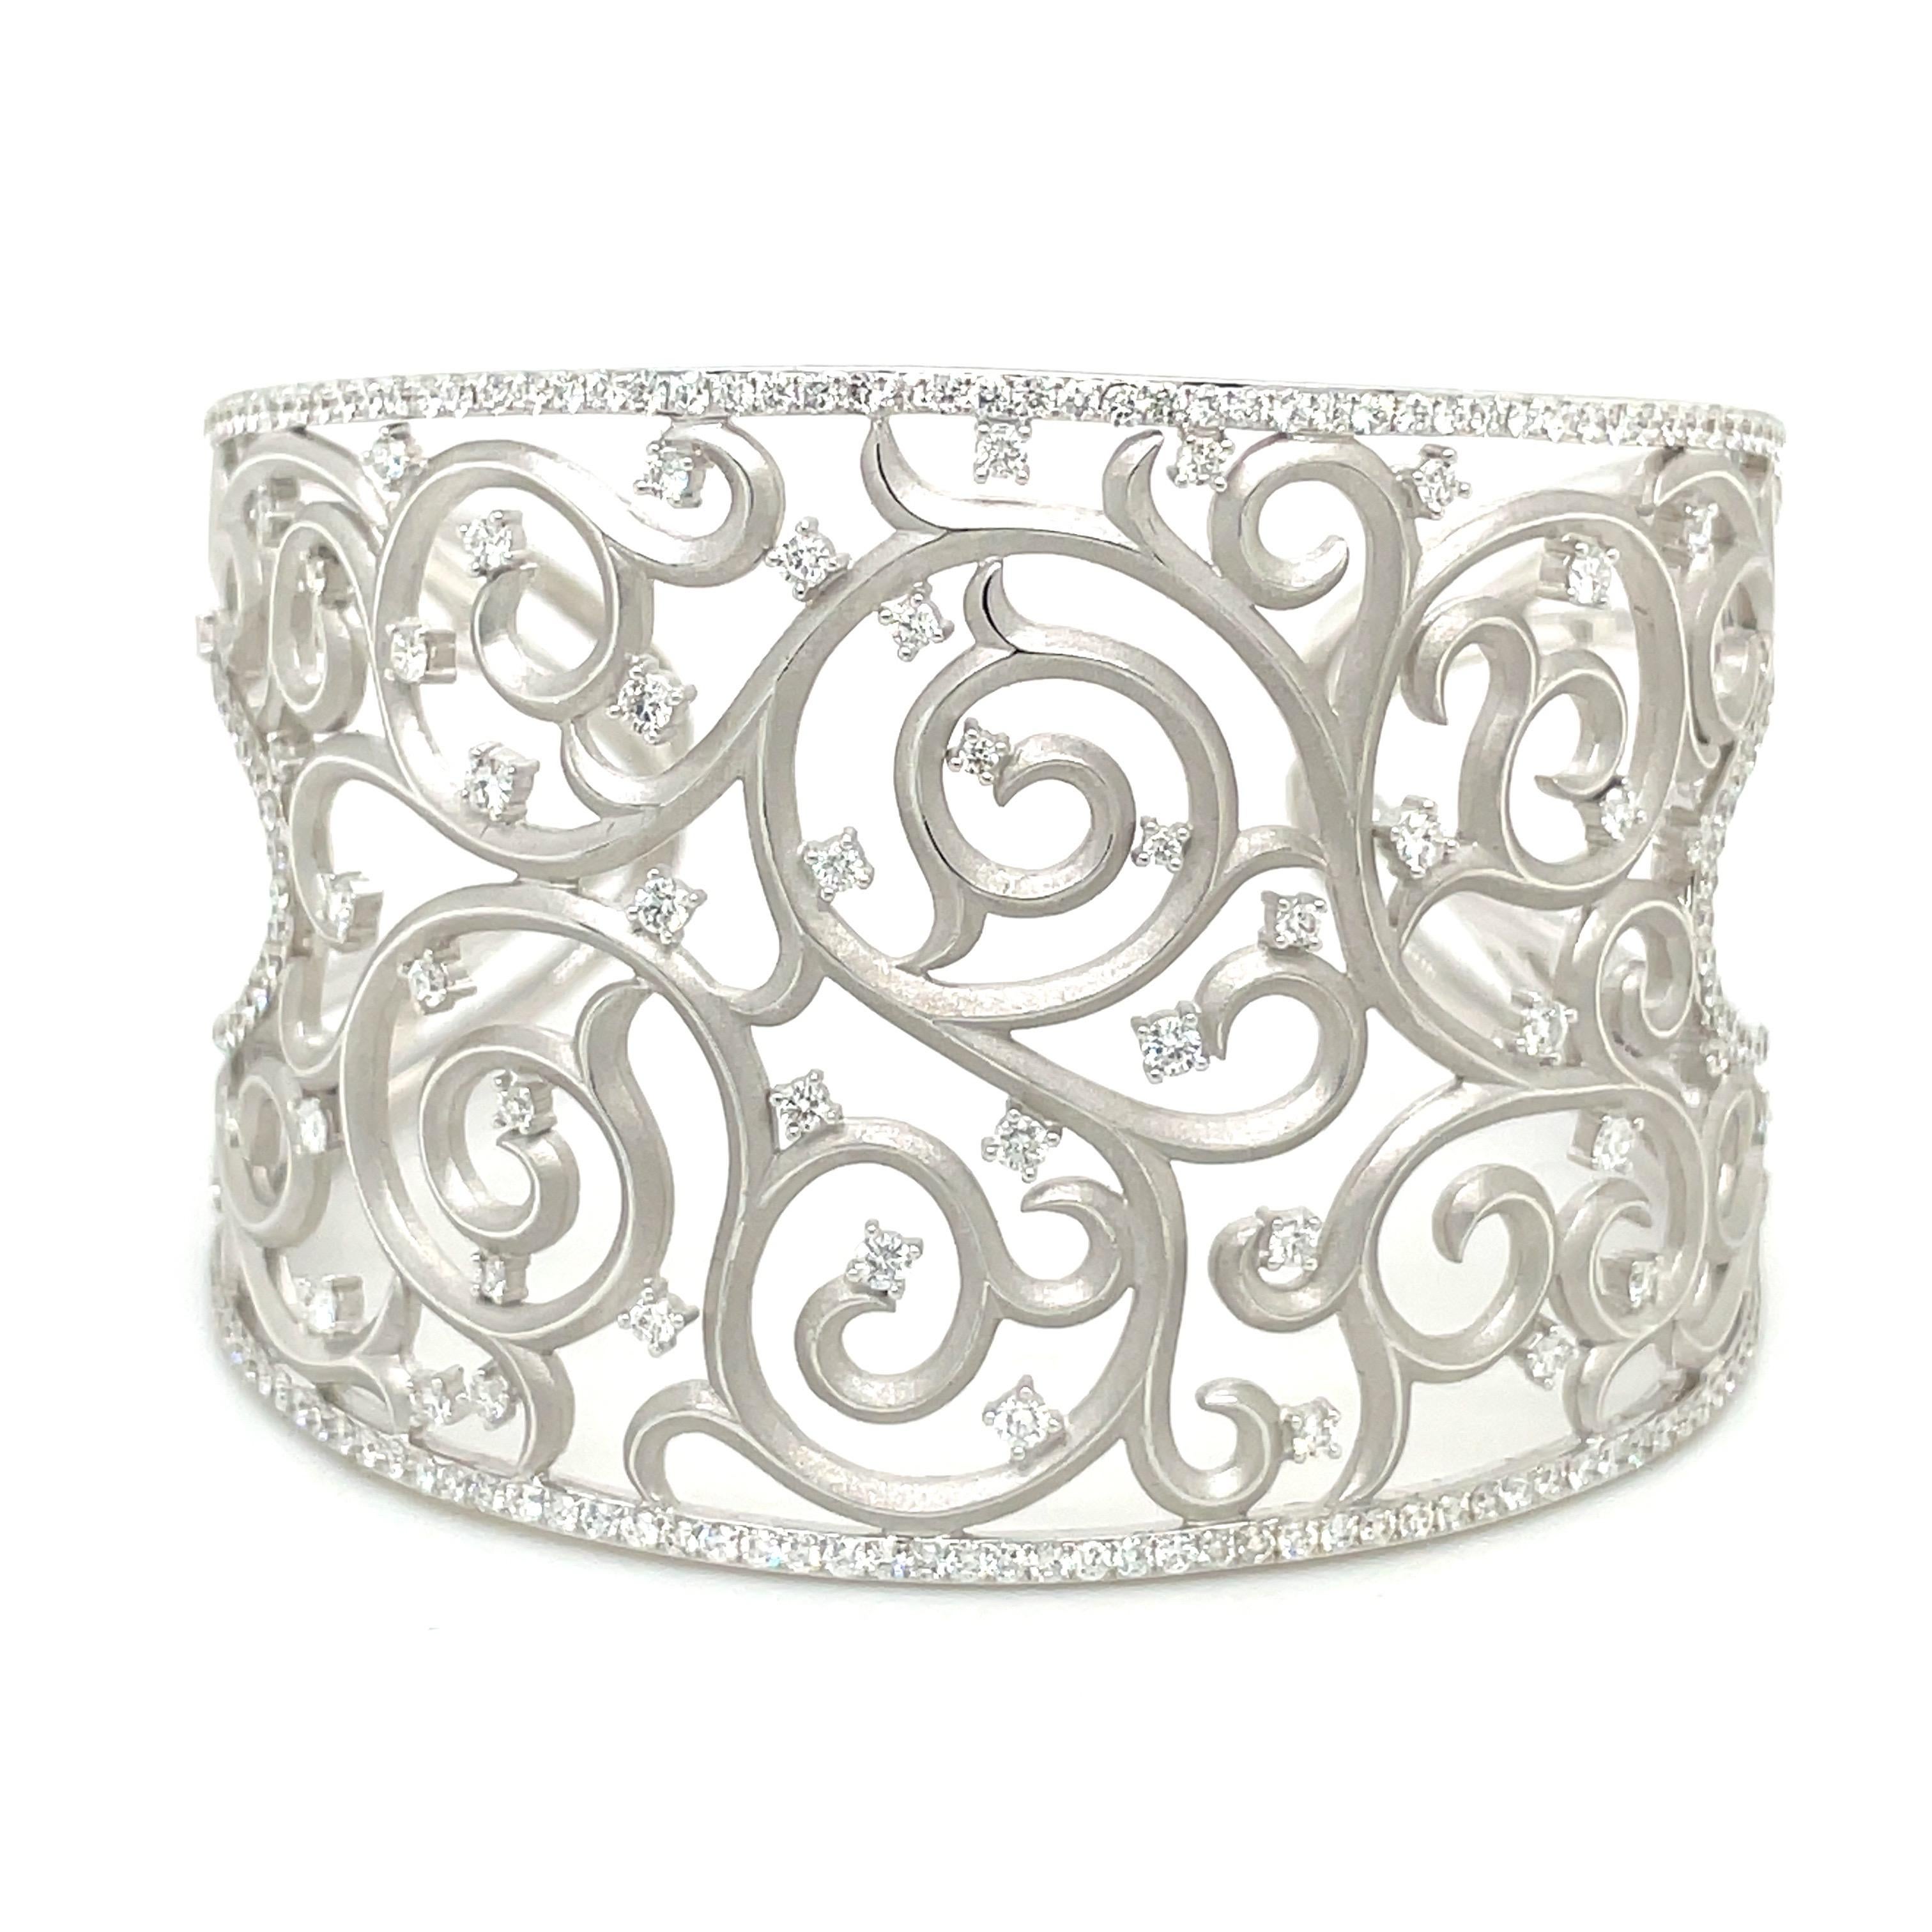 Cellini 18kt White Gold and Diamond 4.90Ct. Lace Cuff Bracelet For Sale 4